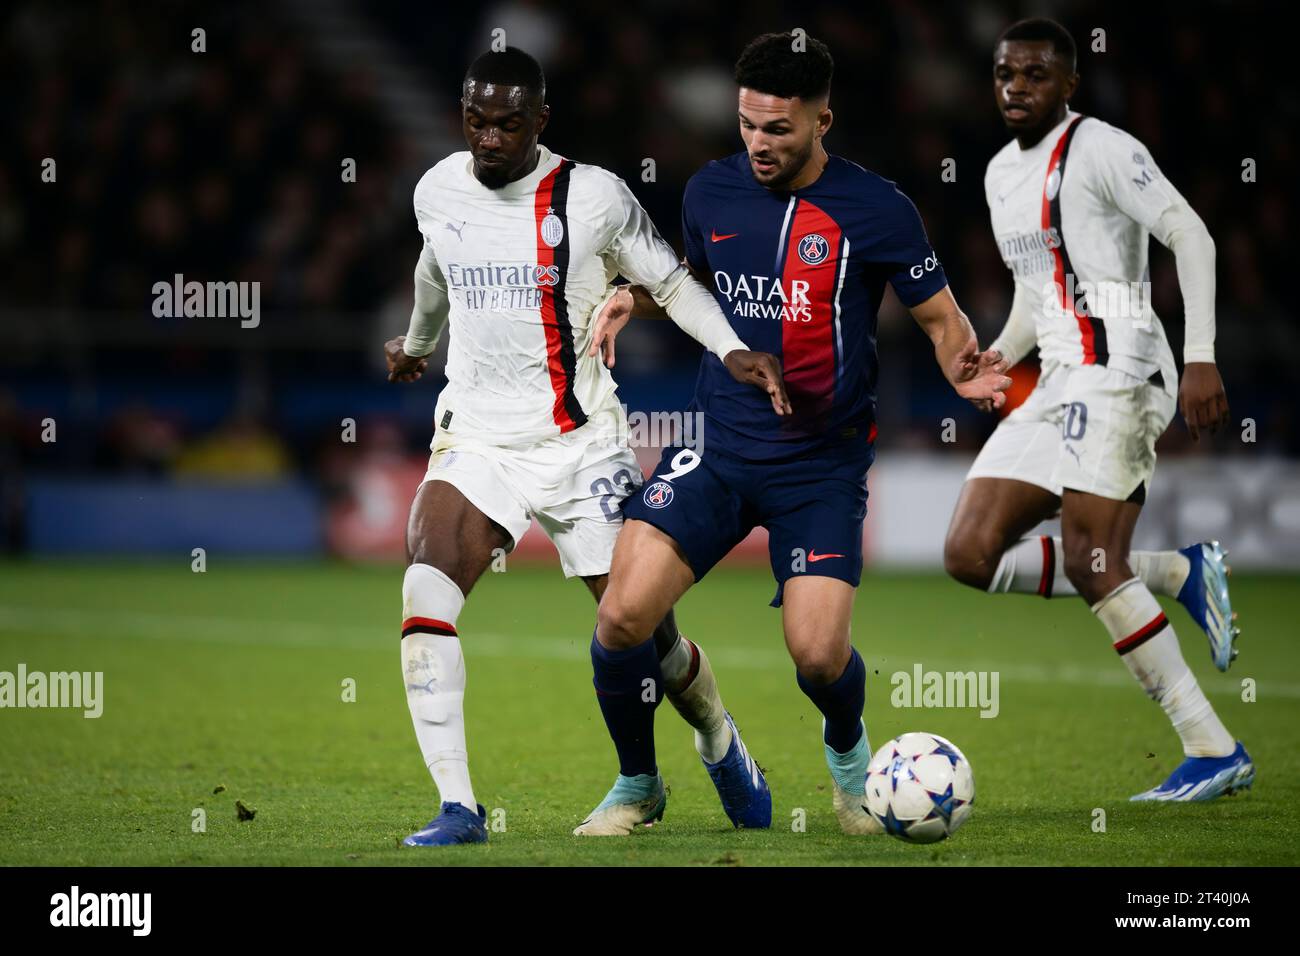 Goncalo Ramos of Paris Saint-Germain FC competes for the ball with Fikayo Tomori and Pierre Kalulu of AC Milan during the UEFA Champions League football match between Paris Saint-Germain FC and AC Milan. Stock Photo